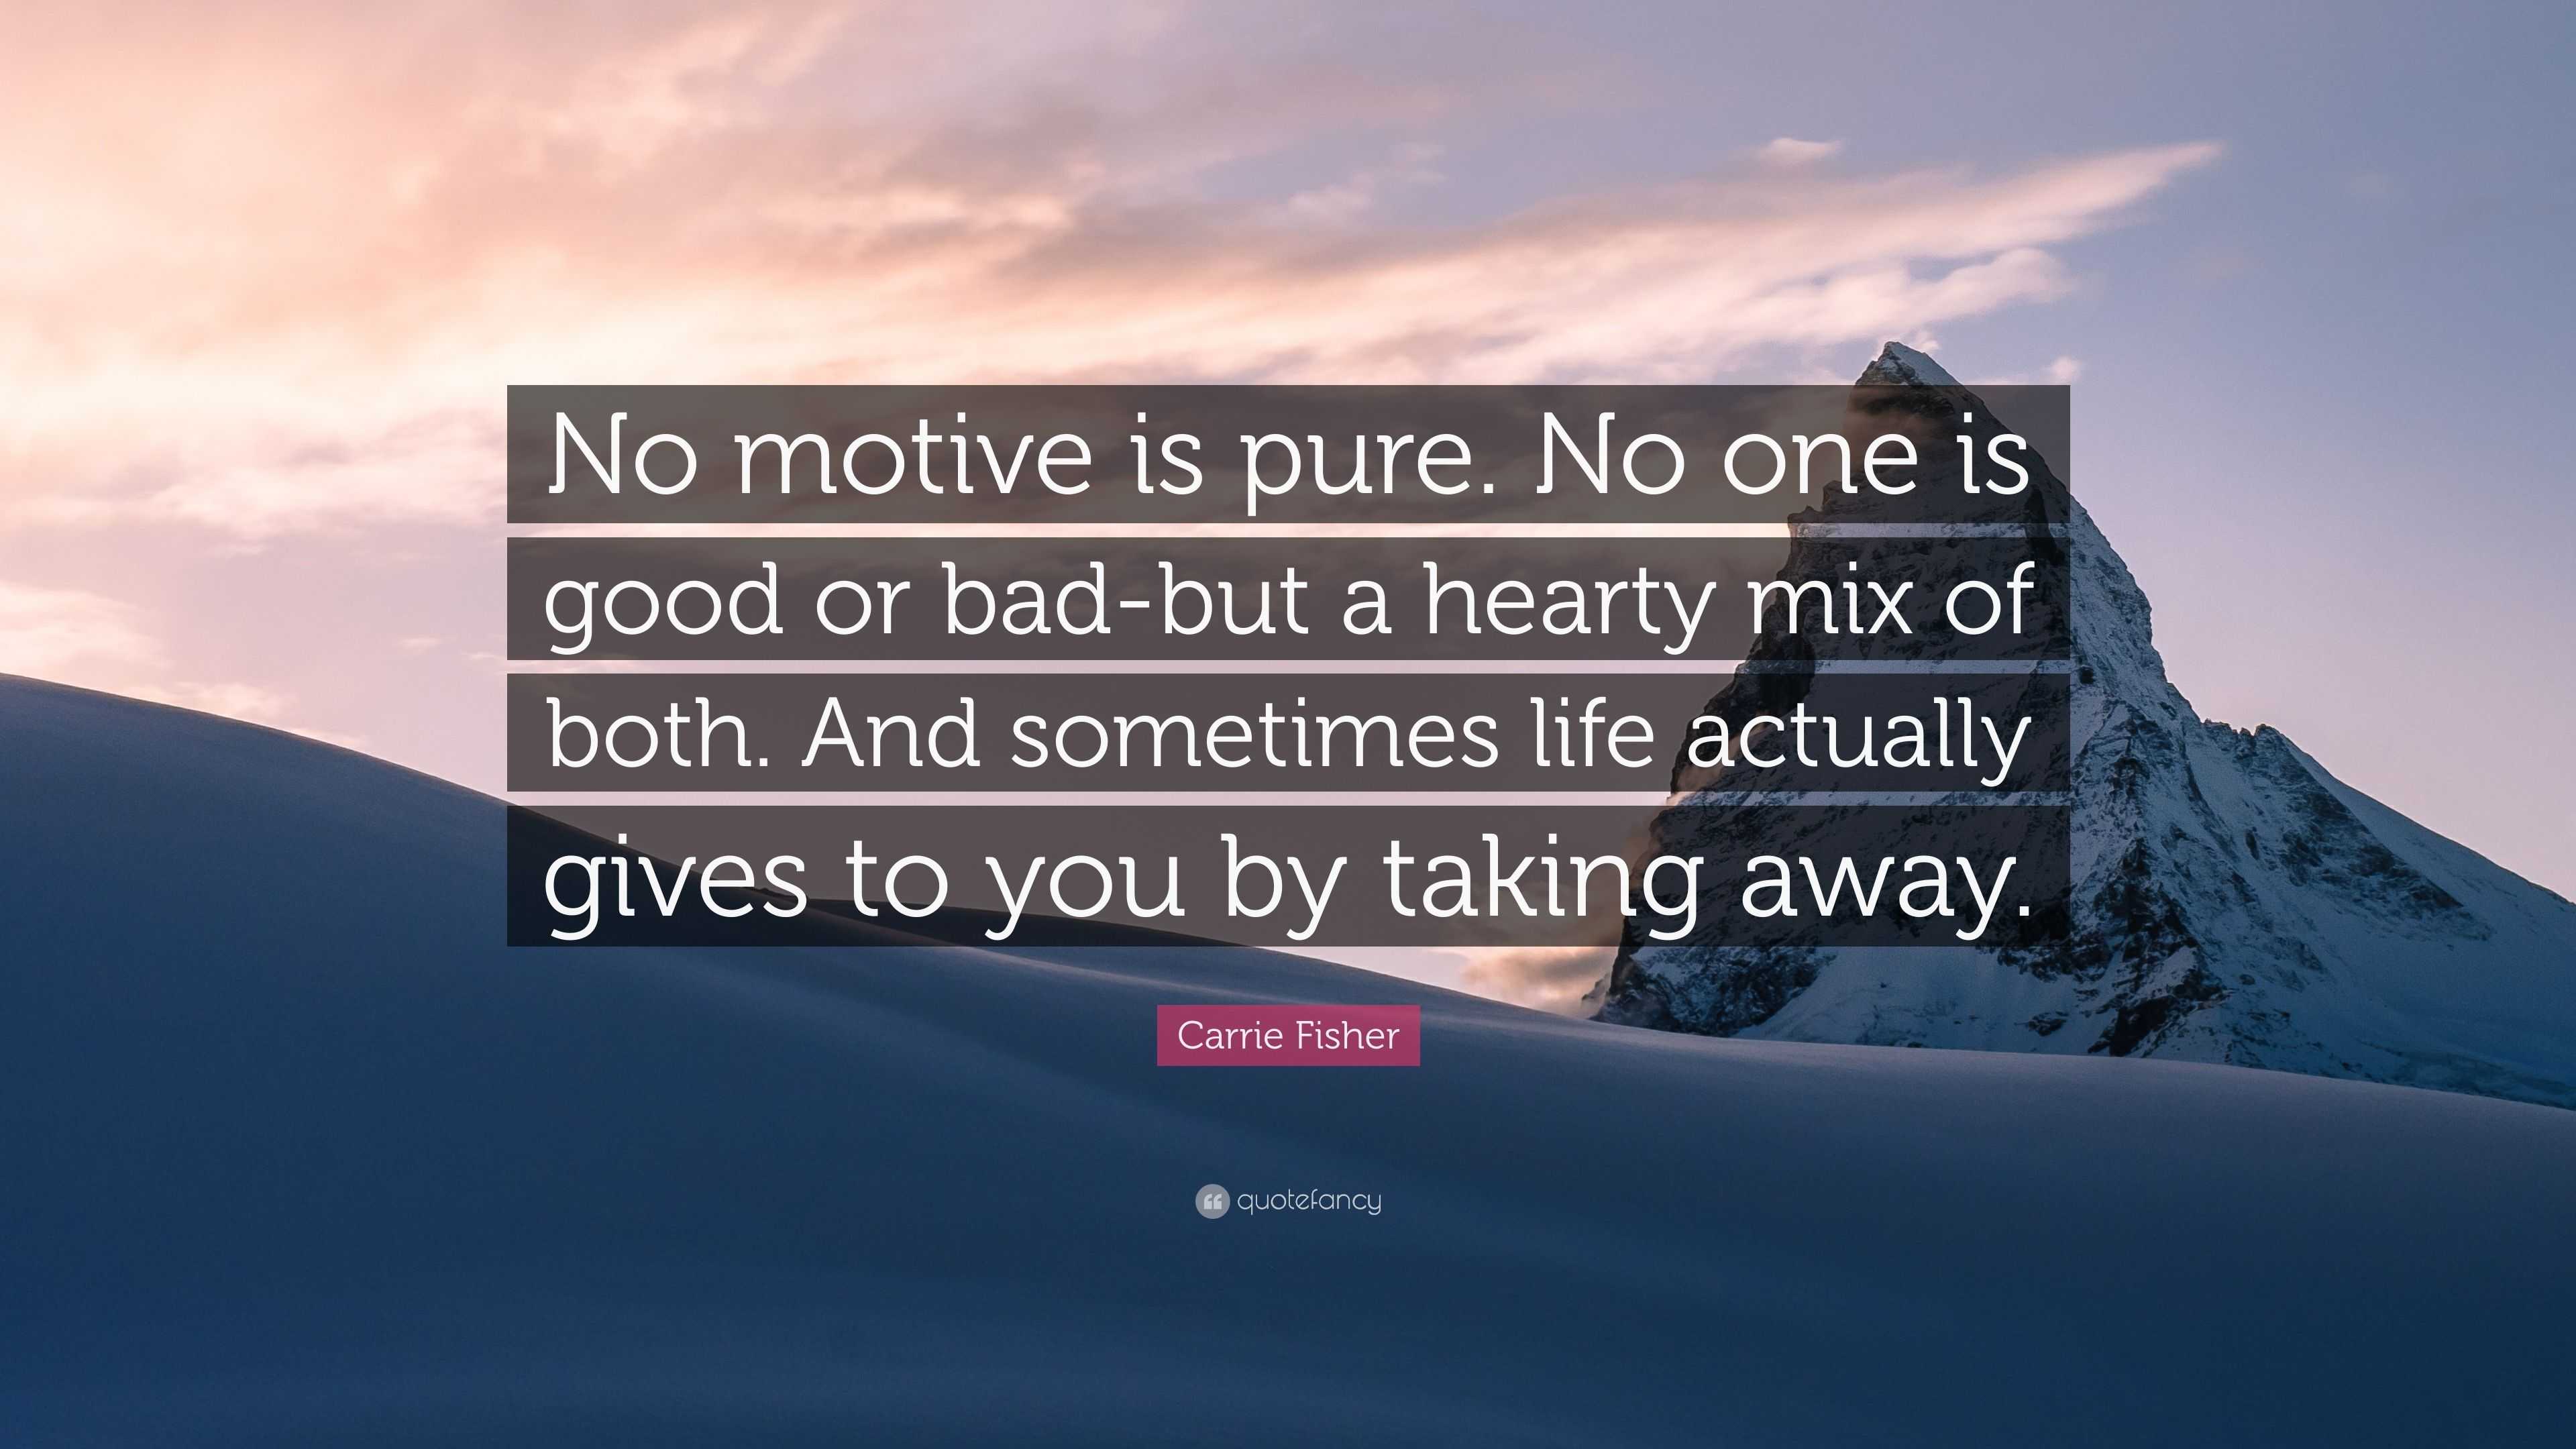 Carrie Fisher Quote: “No motive is pure. No one is good or bad-but a